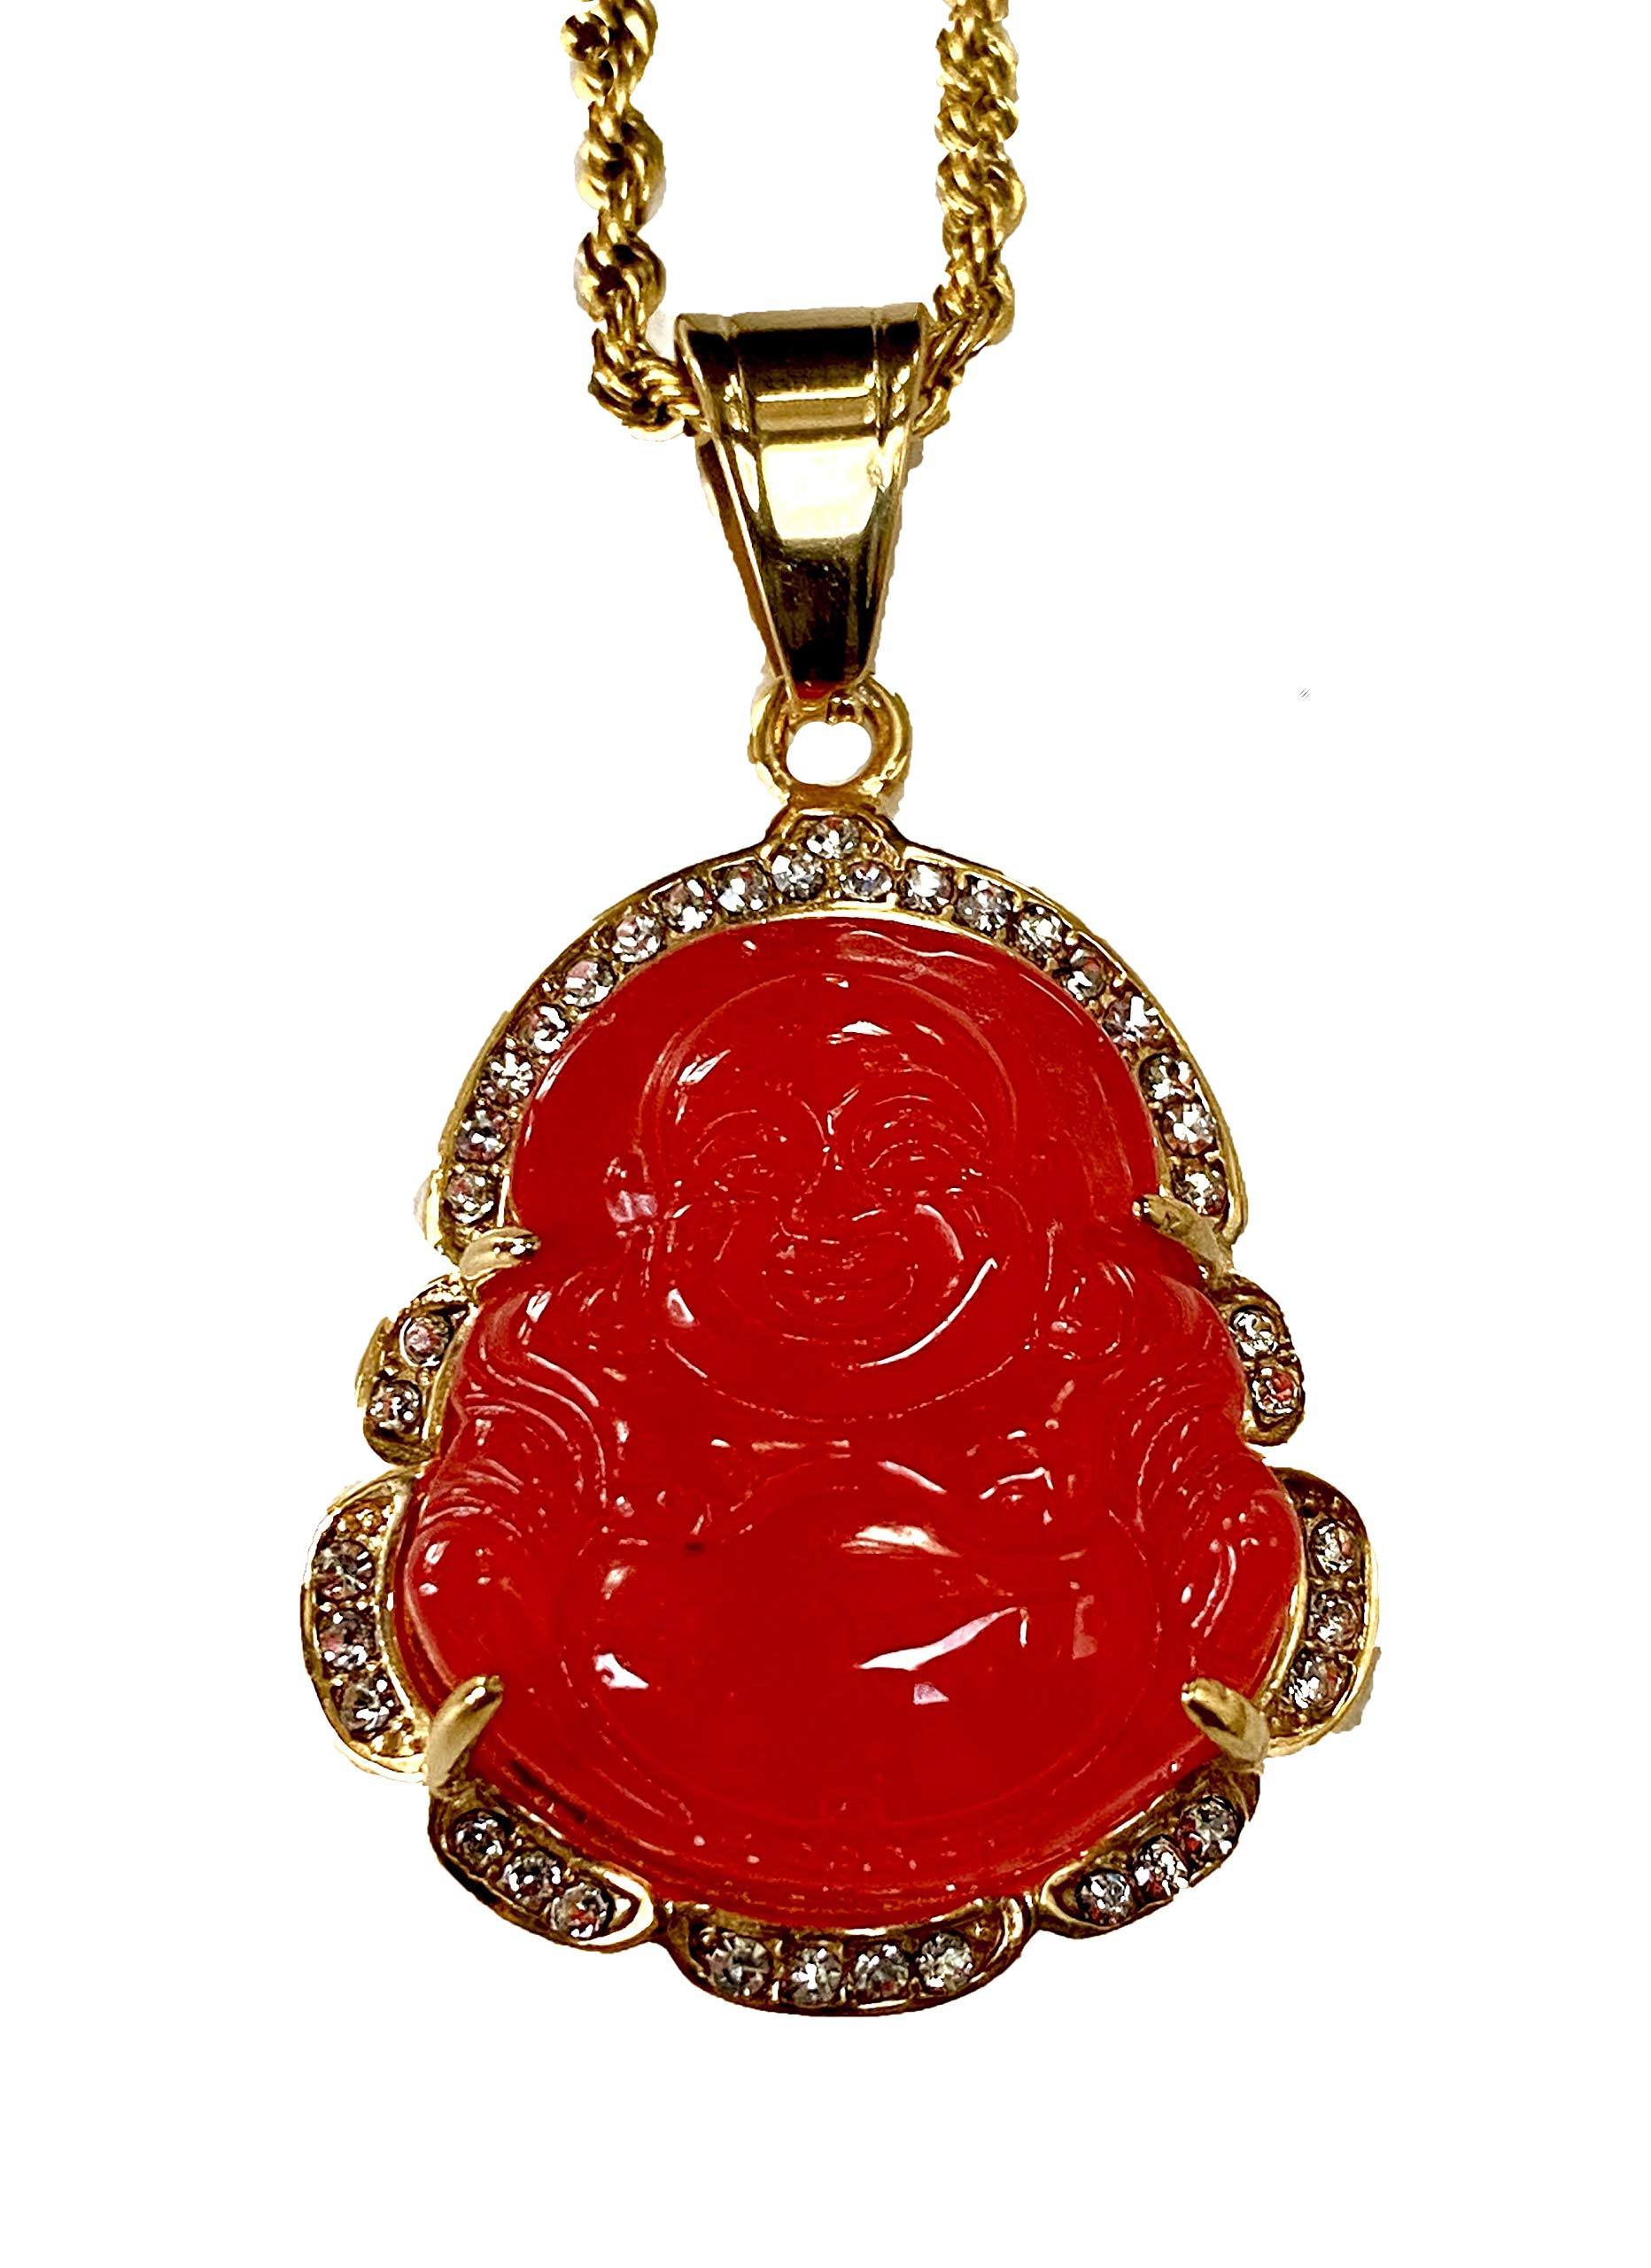 Iced Laughing Buddha Red Jade Pendant Necklace Rope Chain Genuine Certified Grade A Jadeite Jade Hand Crafted, Jade Necklace, 14k Gold Filled Laughing Jade Buddha Necklace, Silver Jade Medallion, Fast Prime Shipping